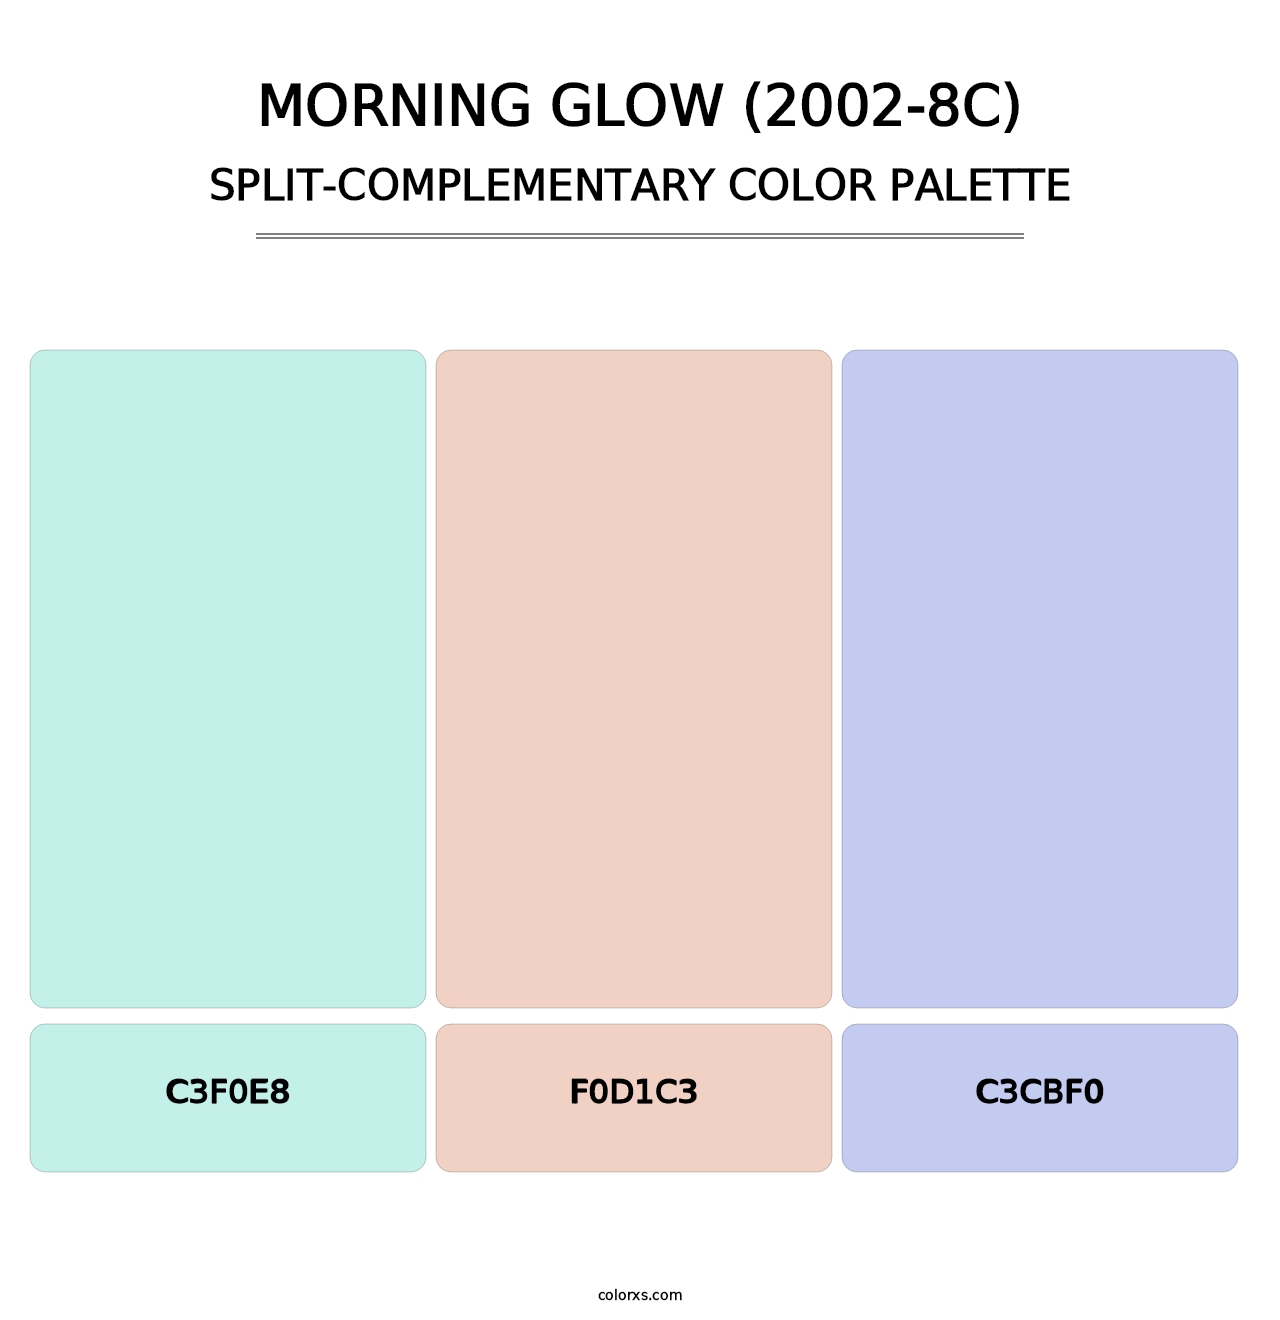 Morning Glow (2002-8C) - Split-Complementary Color Palette